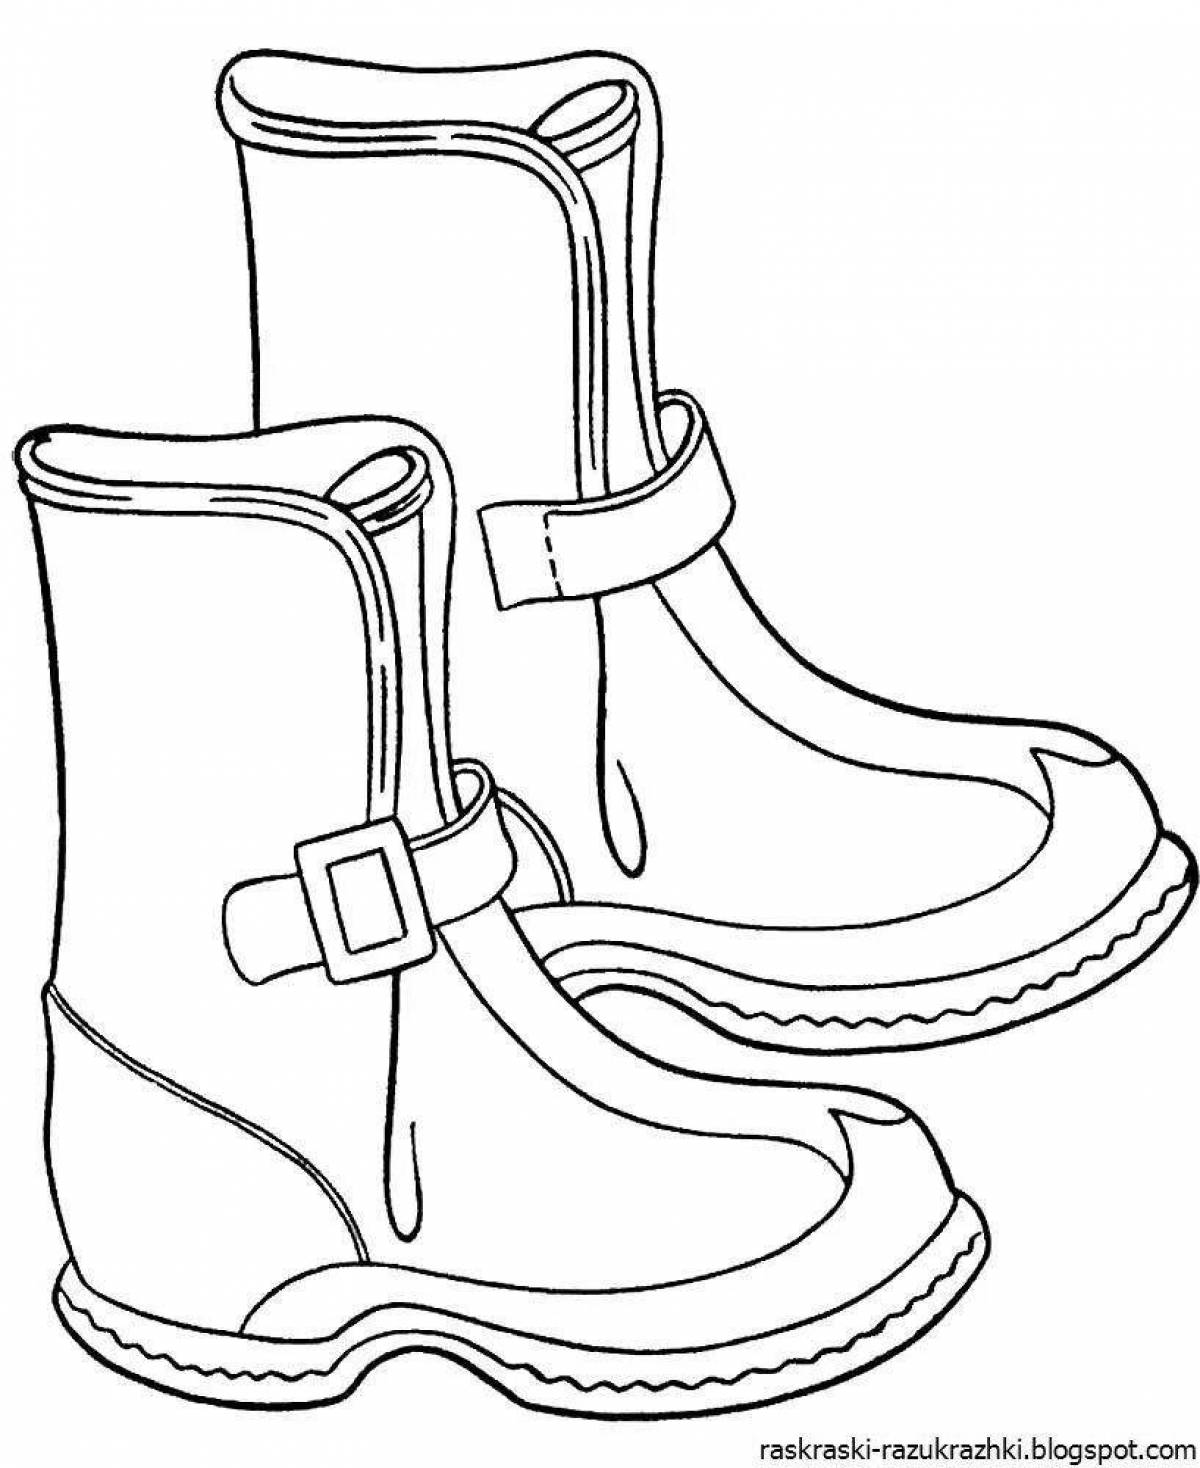 Colourful winter shoes coloring book for children